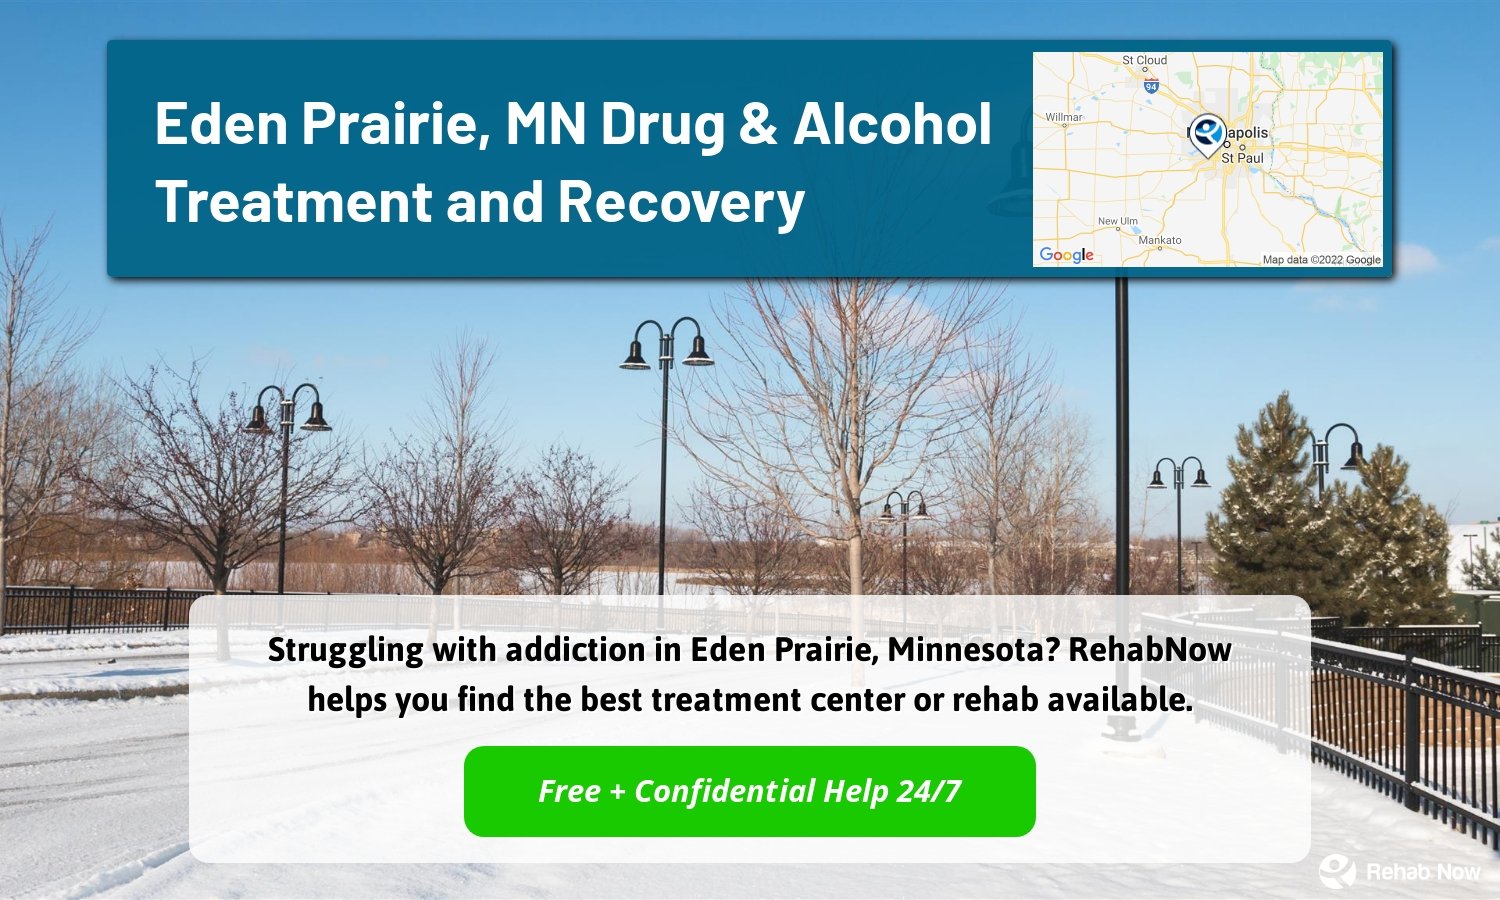 Struggling with addiction in Eden Prairie, Minnesota? RehabNow helps you find the best treatment center or rehab available.